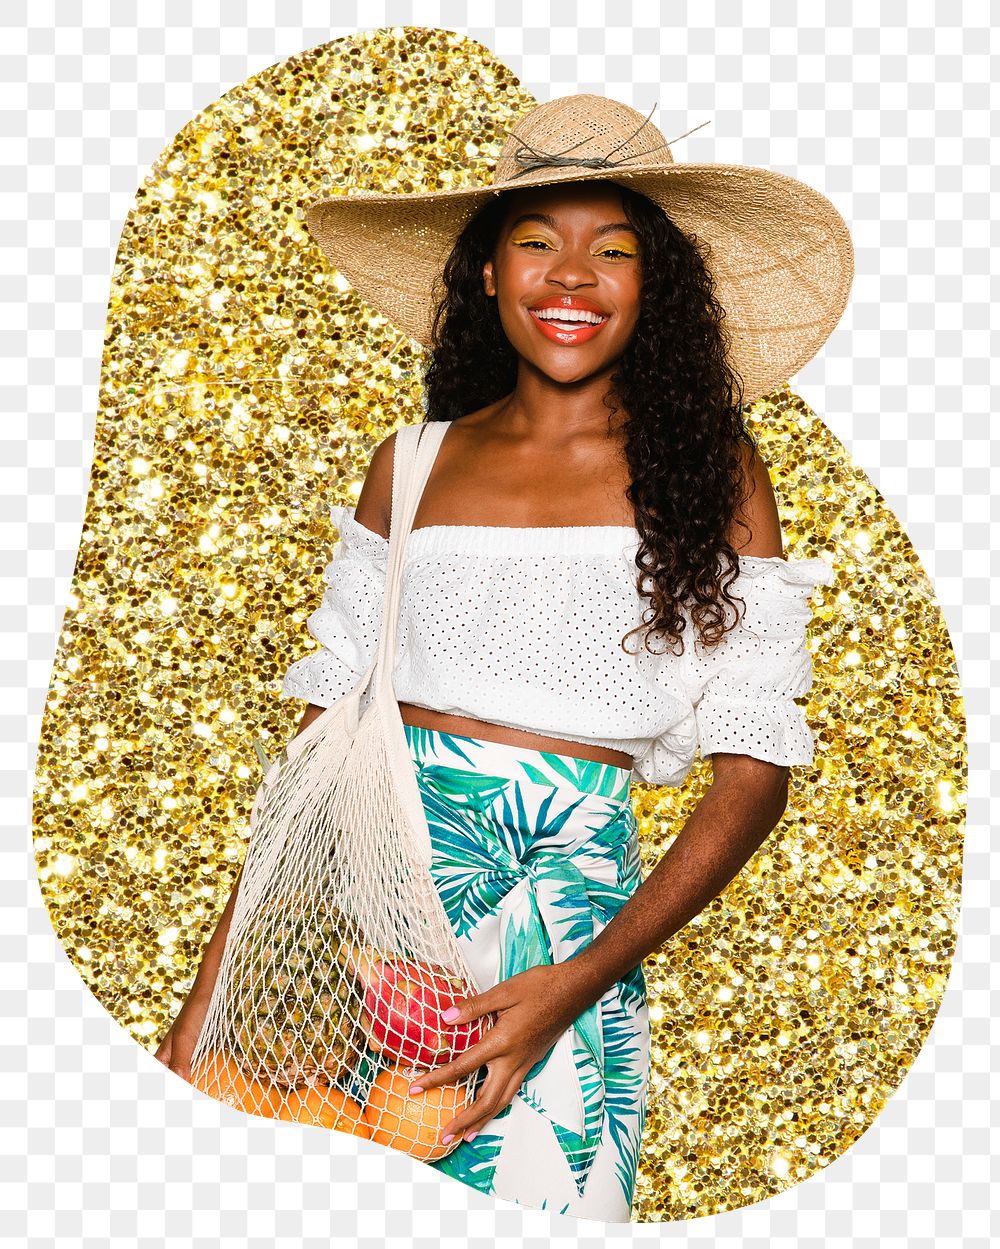 Png happy African woman sticker, gold glitter blob shape, transparent background